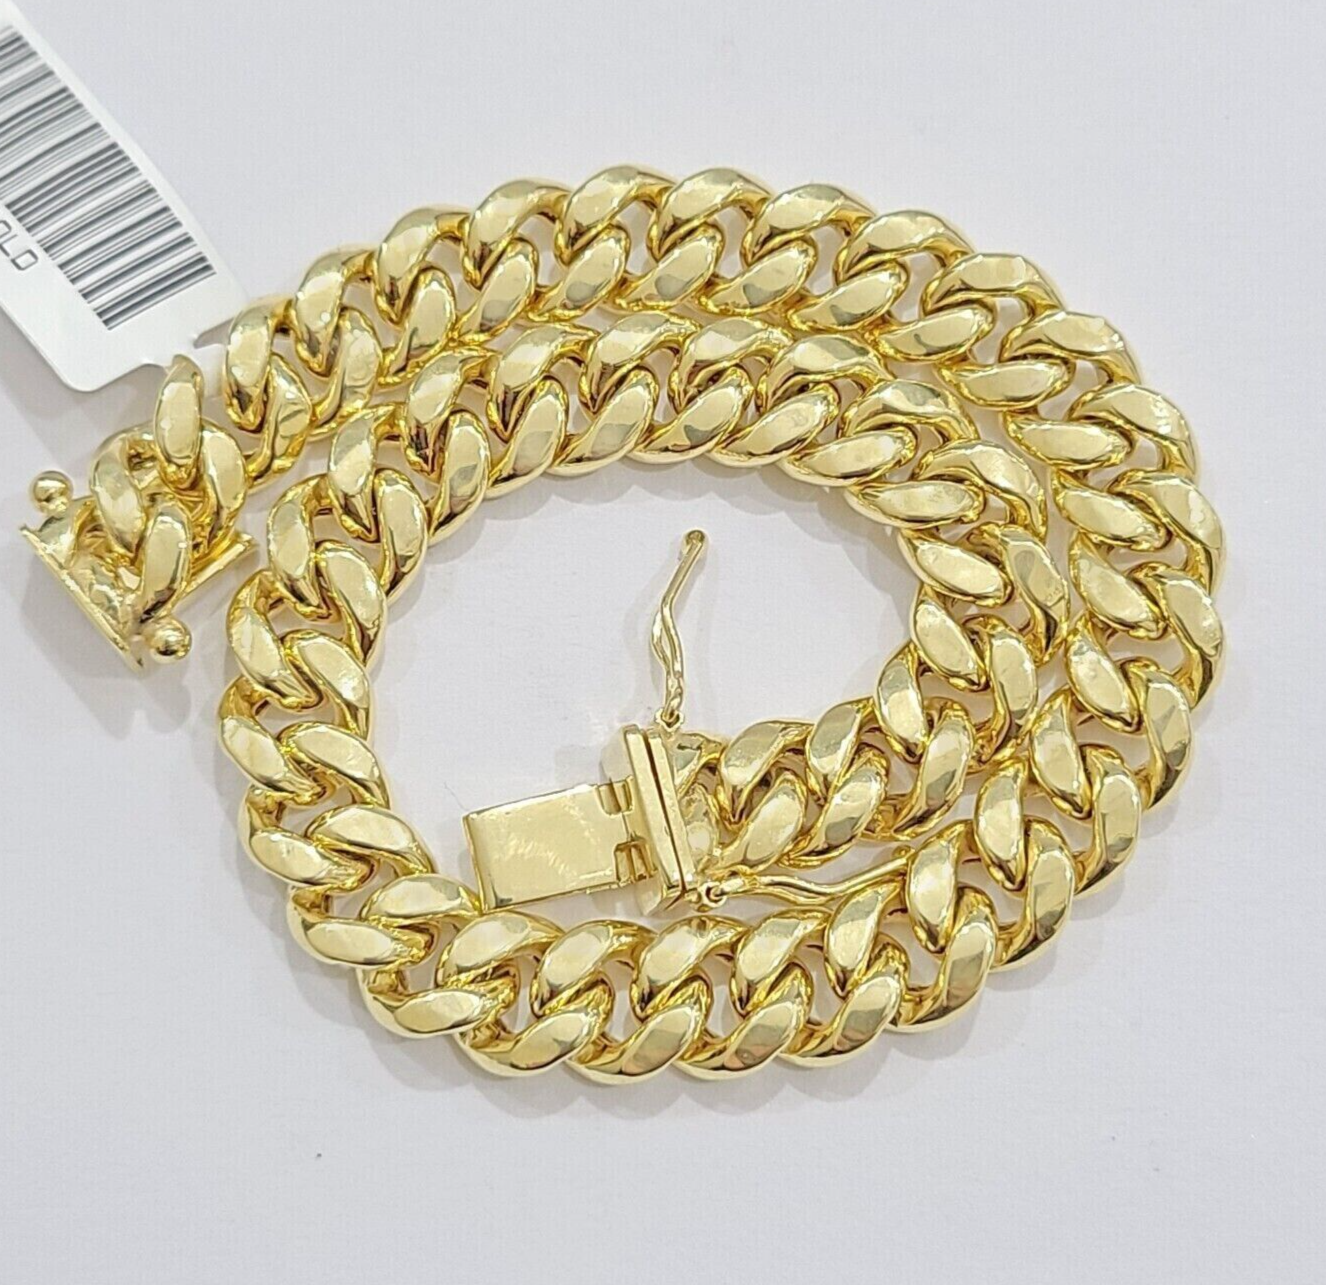 Real 14k Gold Bracelet 8mm 7 inch Miami Cuban Link Box Clasp Strong 14KT LADIES